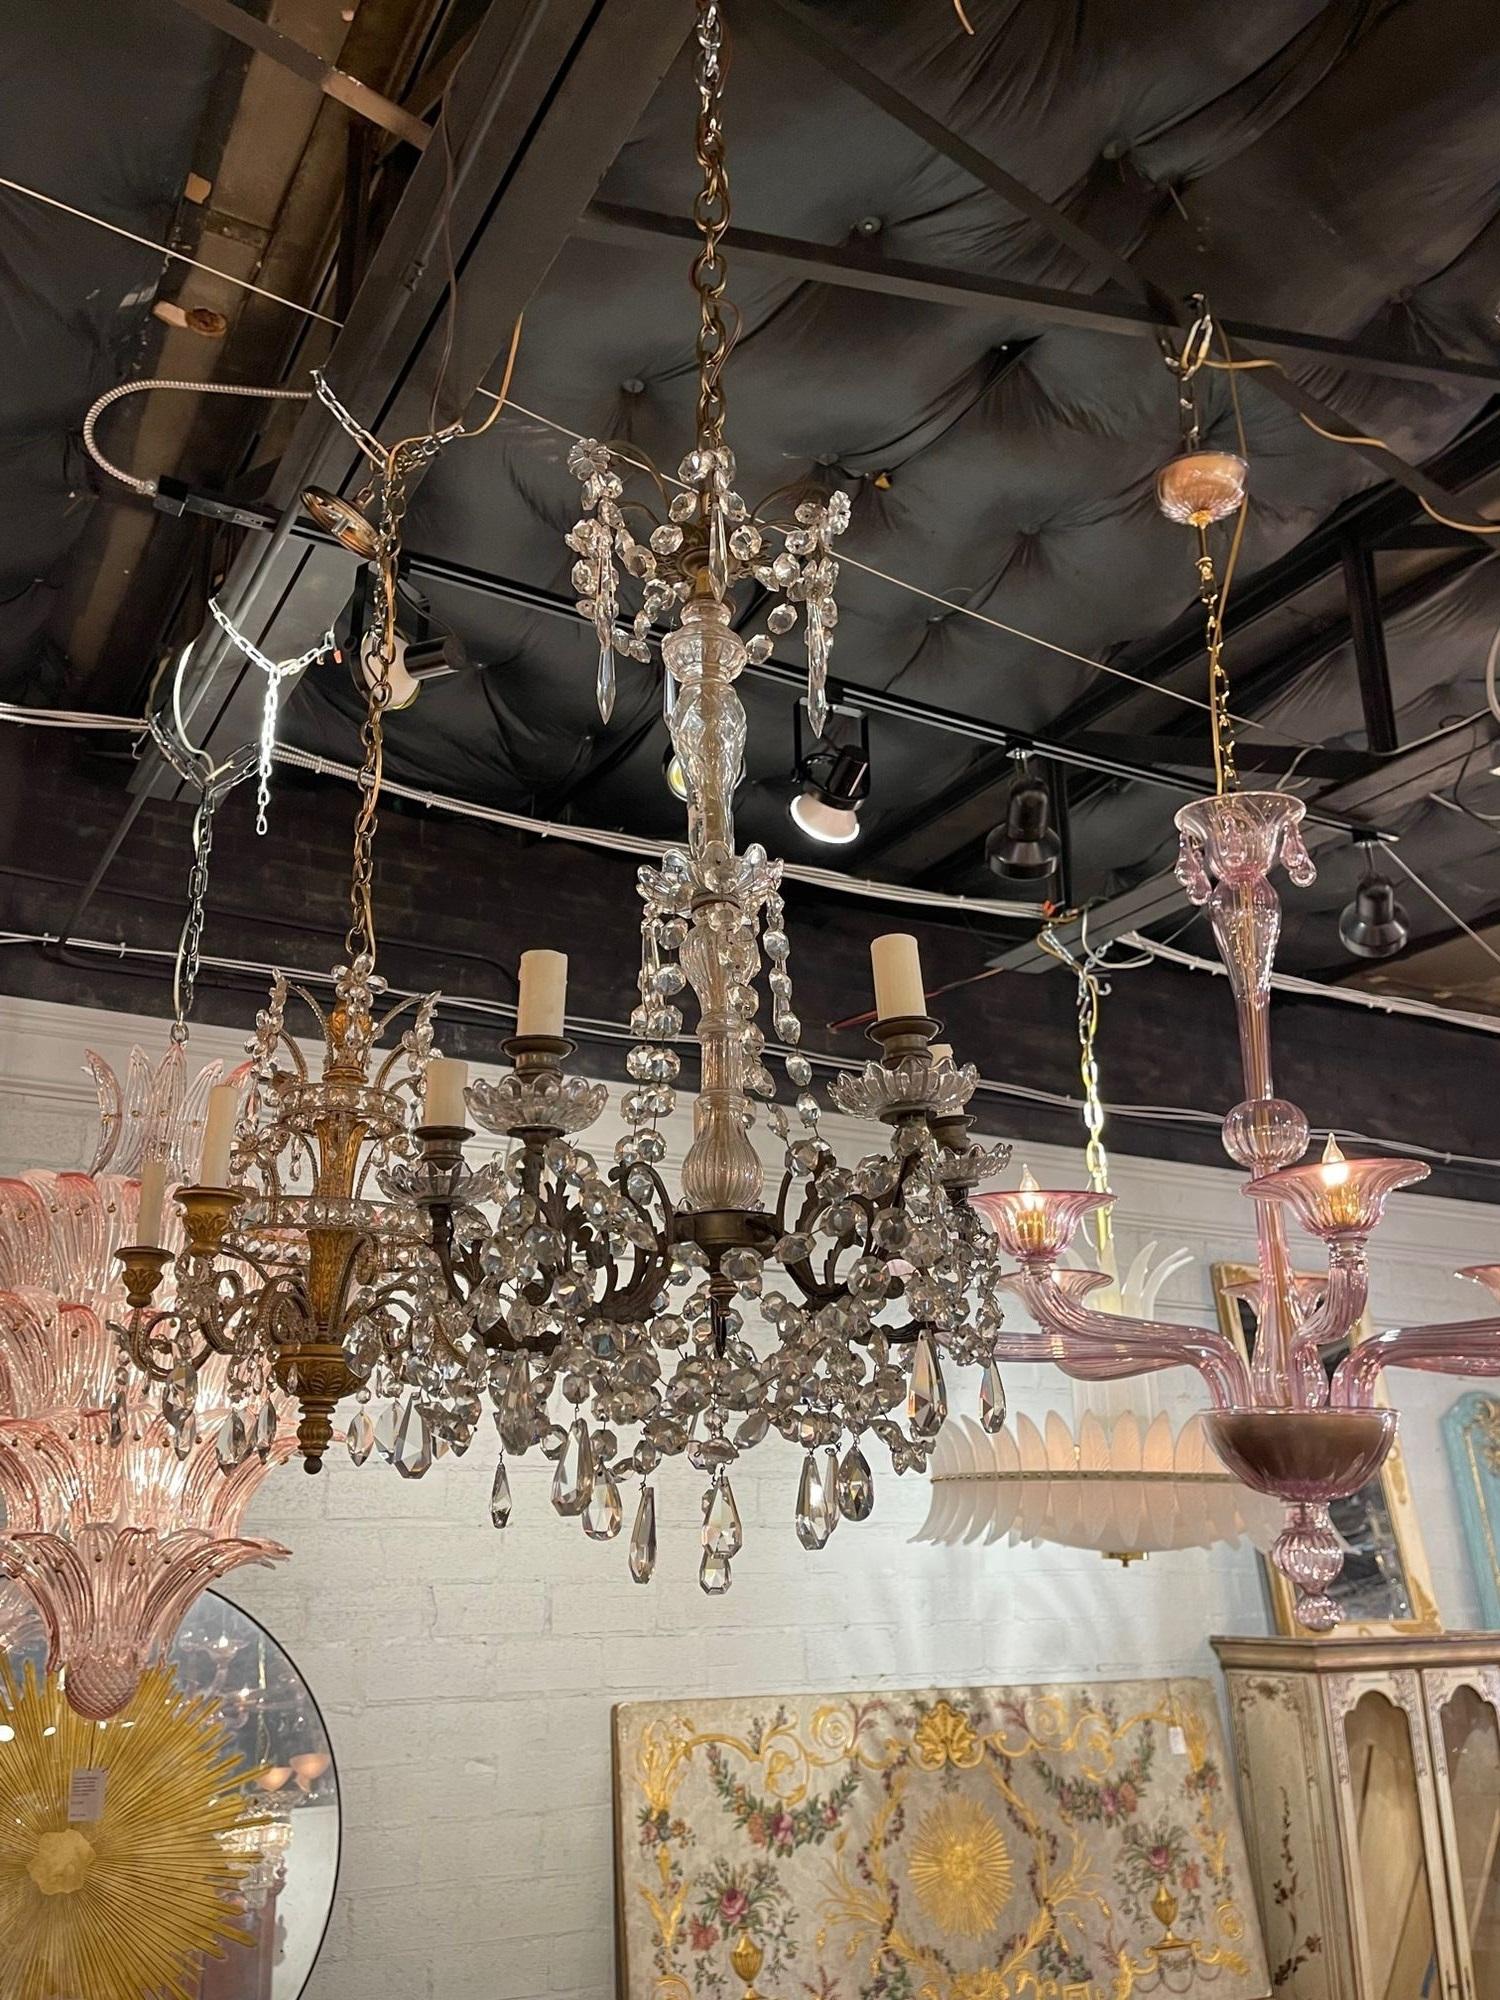 Early 20th century petite French crystal 5-light chandelier. Circa 1920. The chandelier has been professionally re-wired, cleaned and is ready to hang. Includes matching chain and canopy.